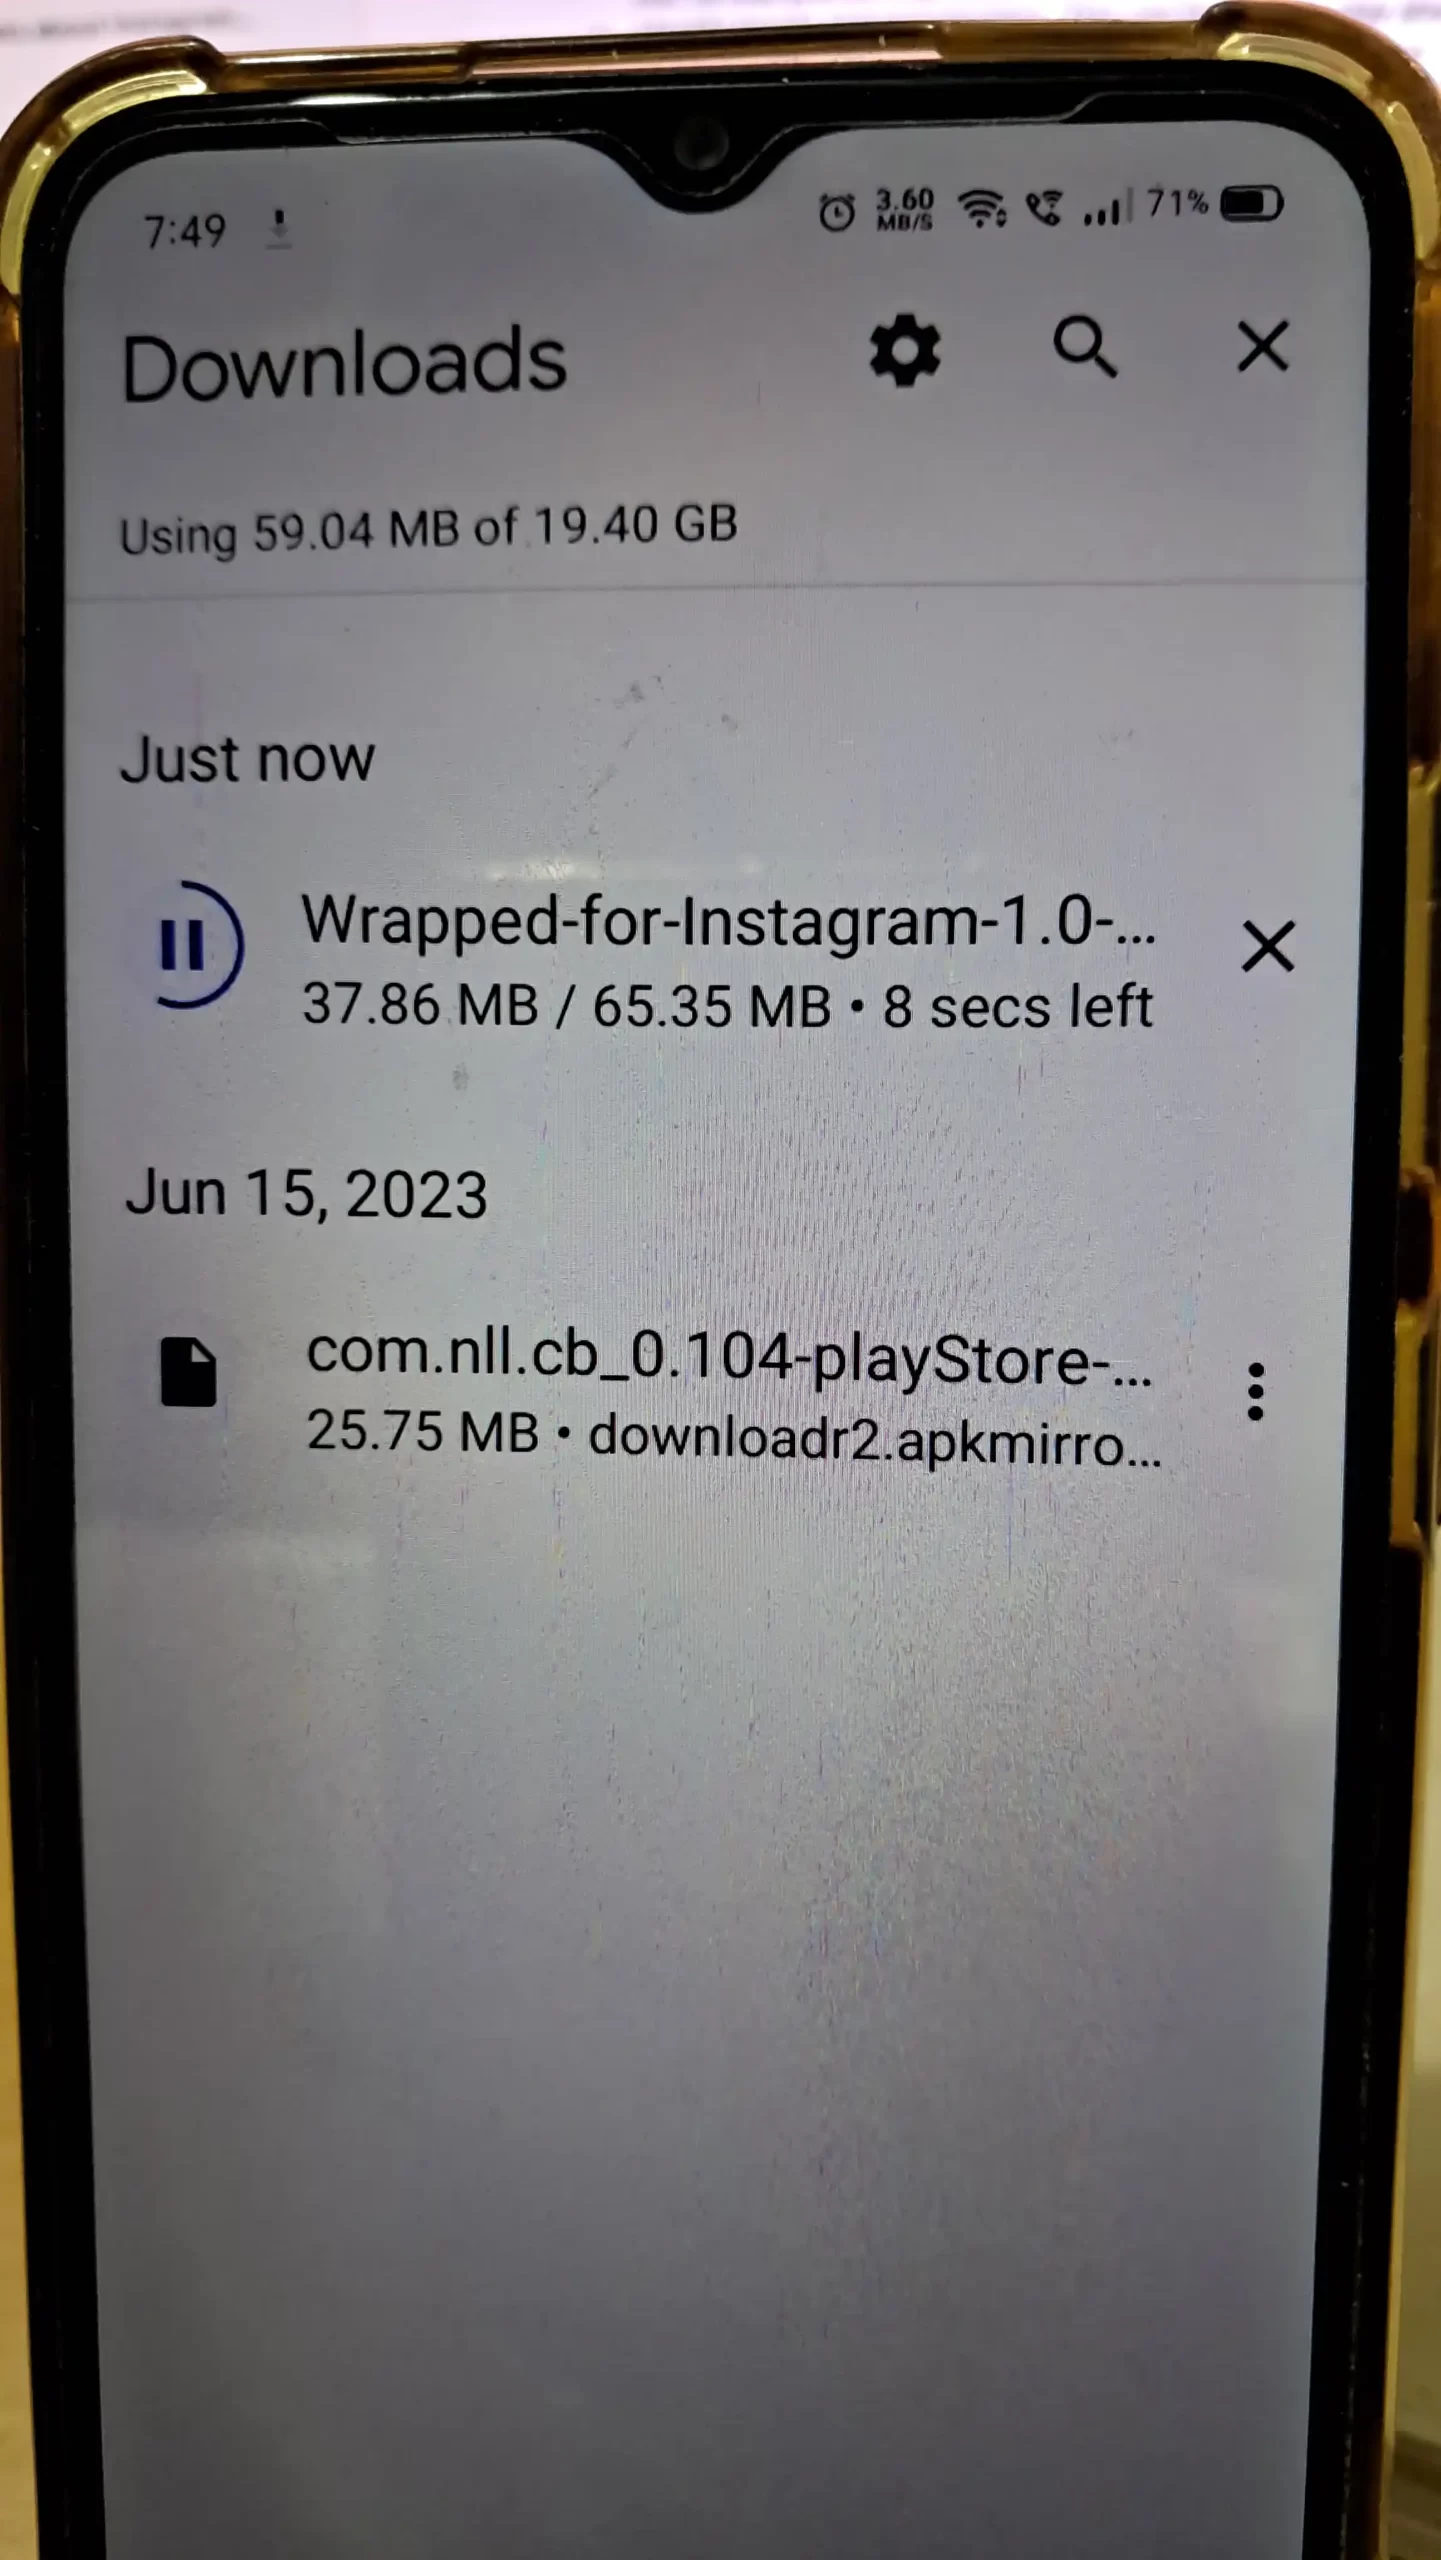 downloading the wrapped apk for instagram in the chrome